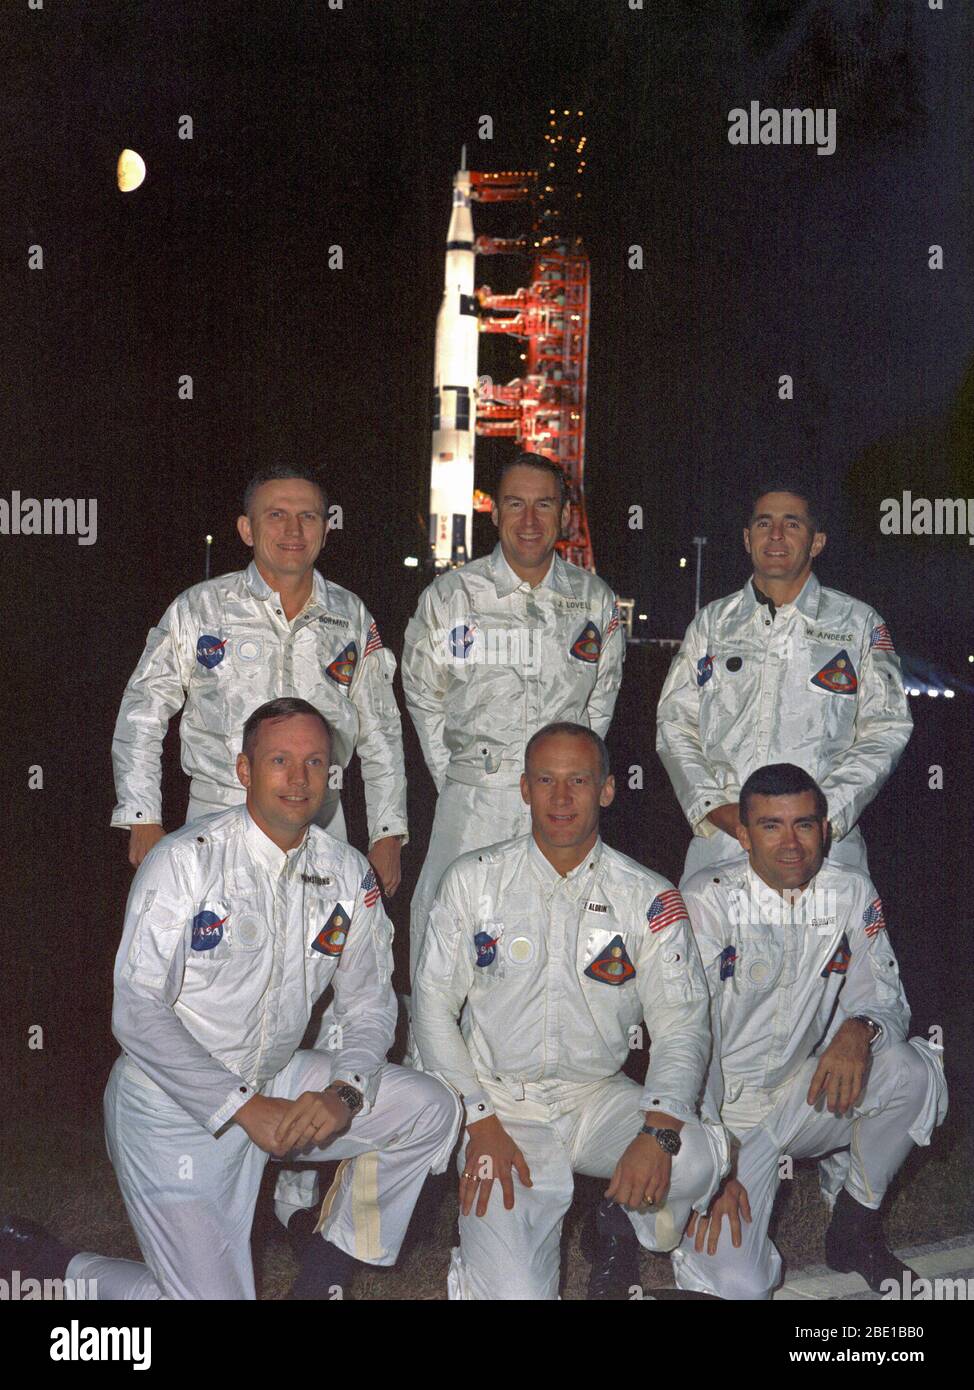 View of the Apollo 8 primary and backup crew portrait with the spacecraft at night in the background. Back row: (l.-r.) Frank Borman, commander, James A. Lovell, command module pilot and William A. Anders, lunar module pilot. Front row: (l.-r.) Neil A. Armstrong, commander, Edwin E. Aldrin, command module pilot and Fred W. Haise Jr., lunar module pilot. Stock Photo